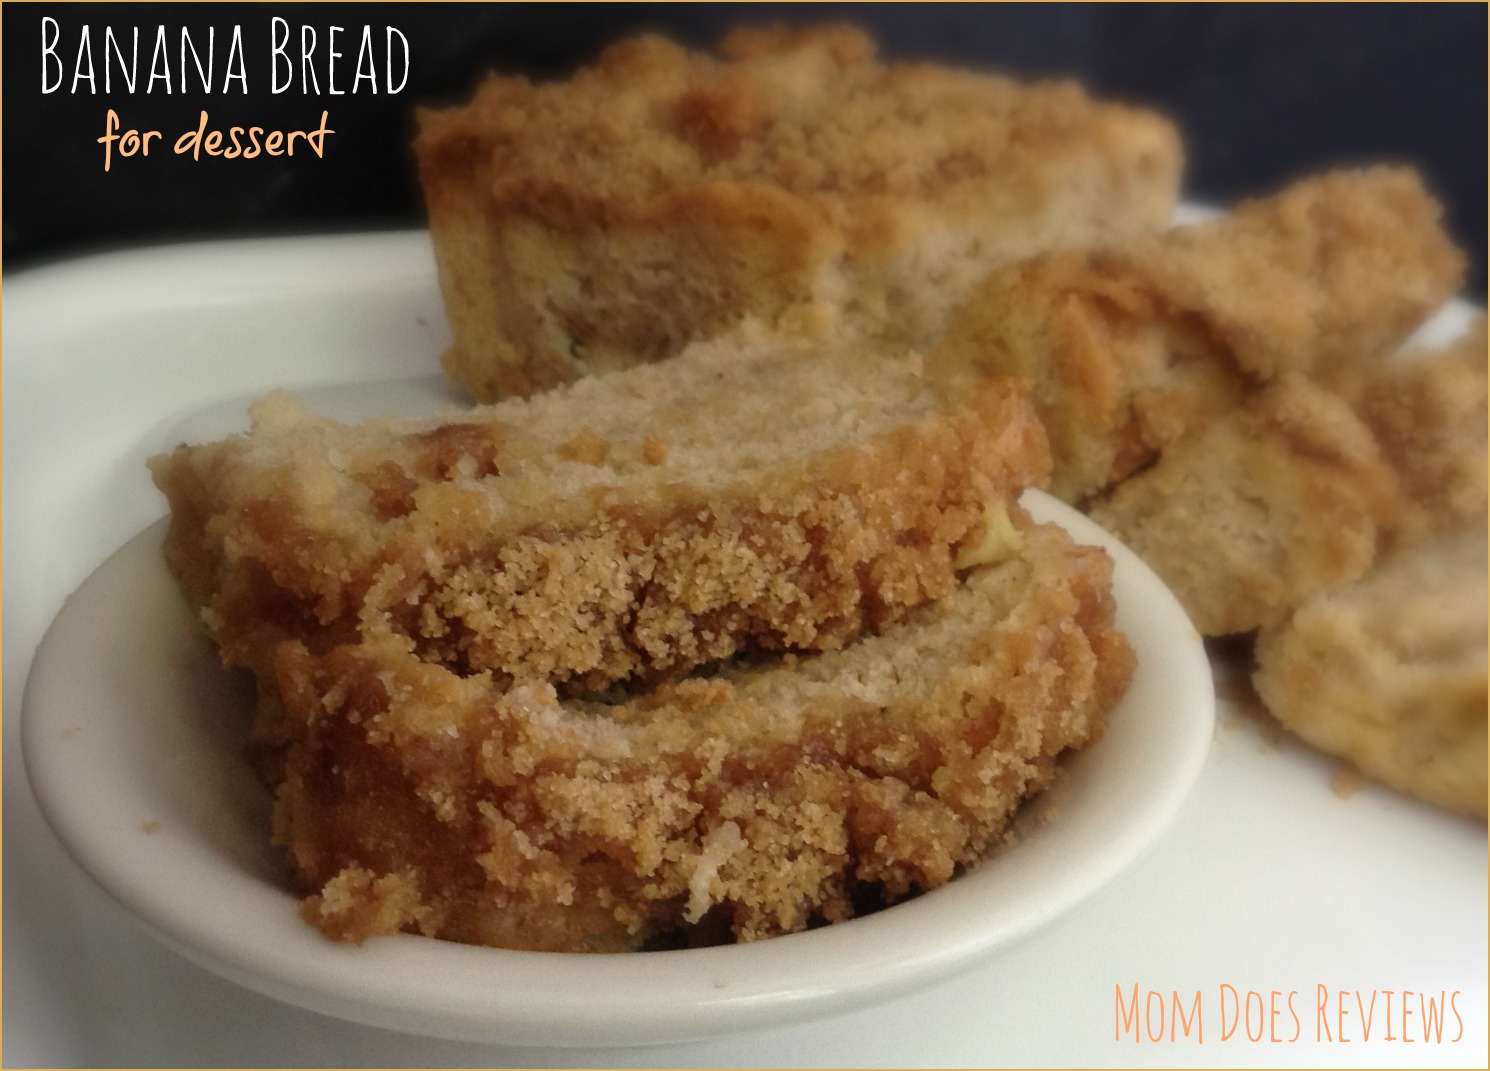 Recipes at Mom Does Reviews | Streusel Topped Banana Bread | Contains NO eggs, milk, butter, or nuts | Less than 1 tbsp of shortening in the topping only 